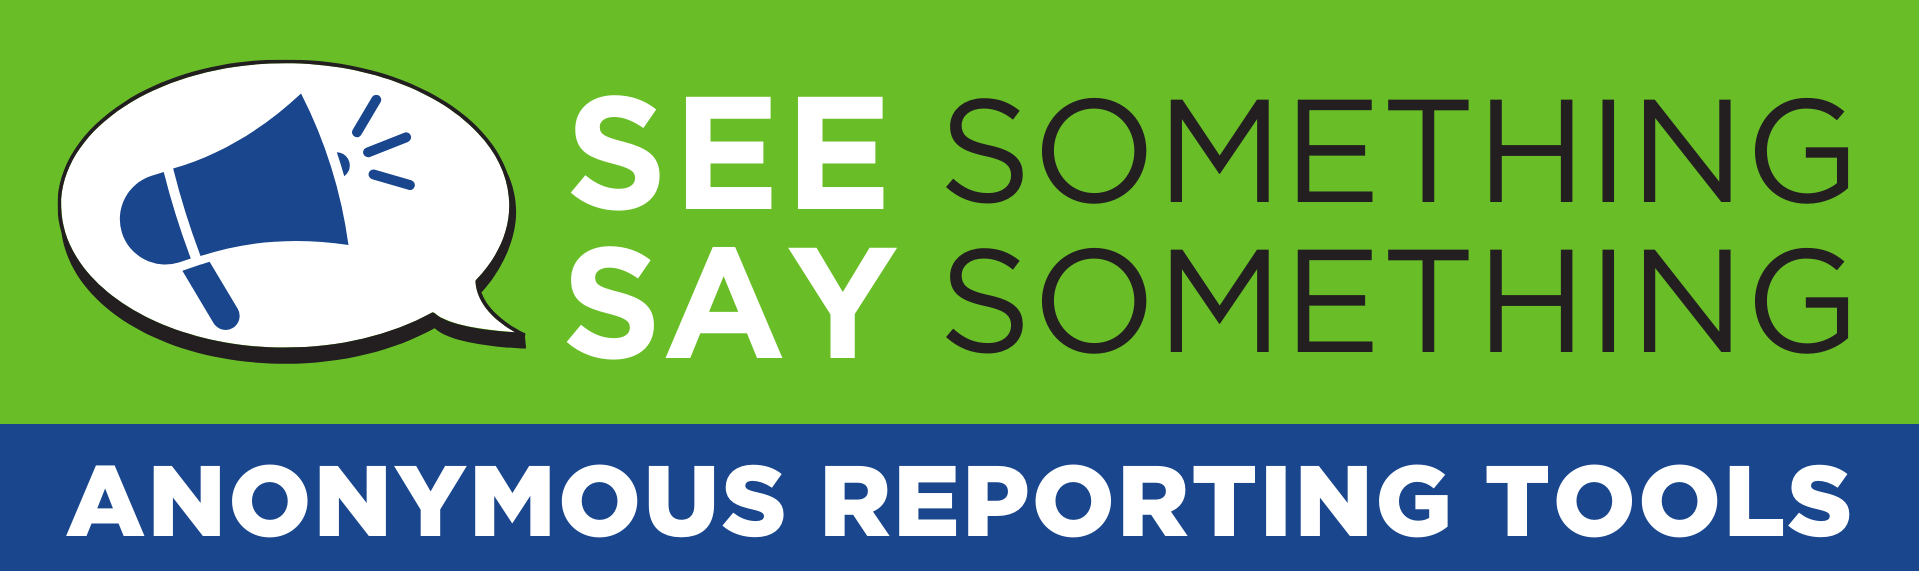 see something, say something anonymous reporting tool